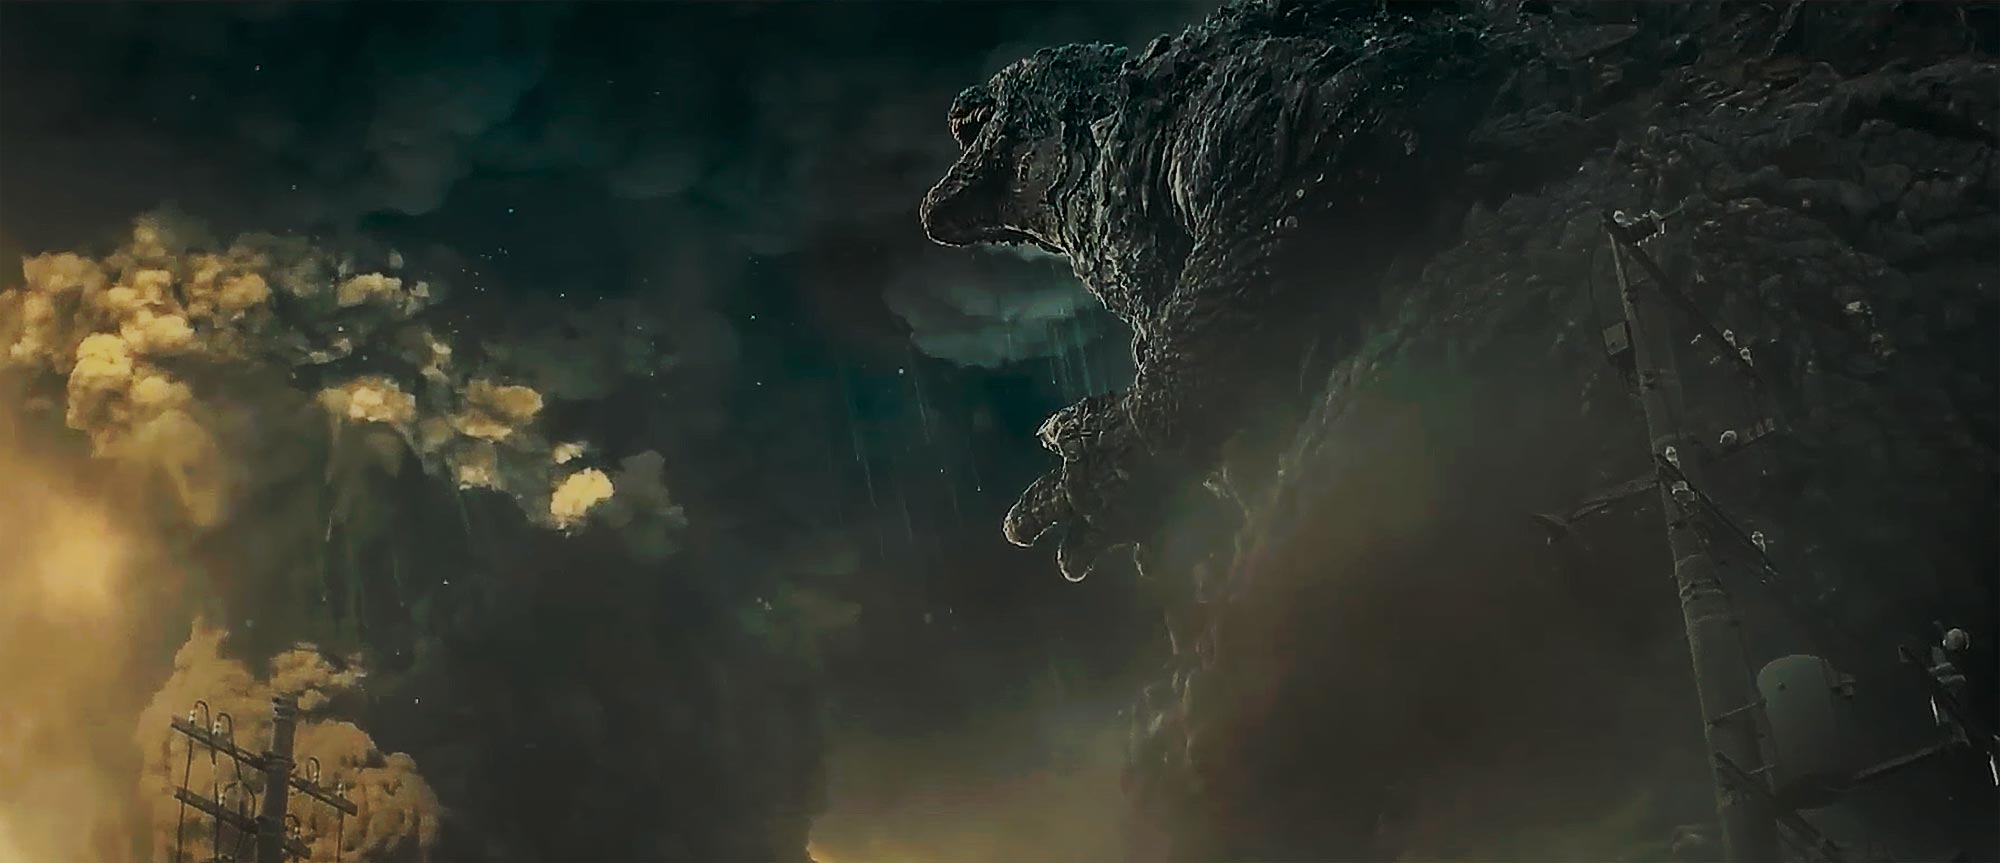 Godzilla Wins His 1st Oscar for Best Visual Effects After 70 Years in the Movie Business 675